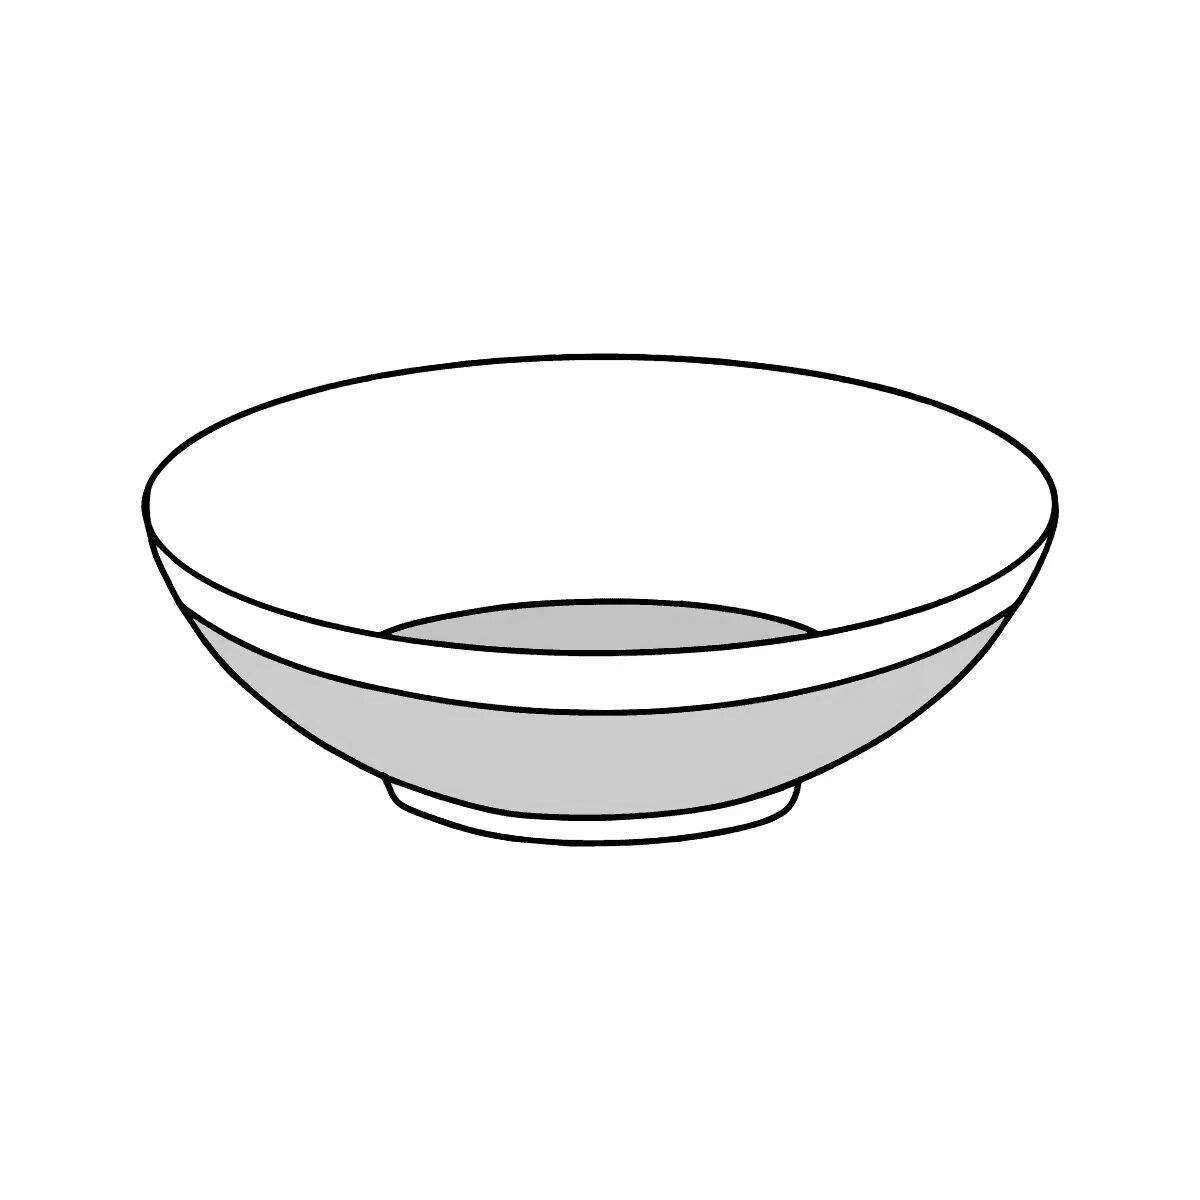 Colorful saucer coloring page